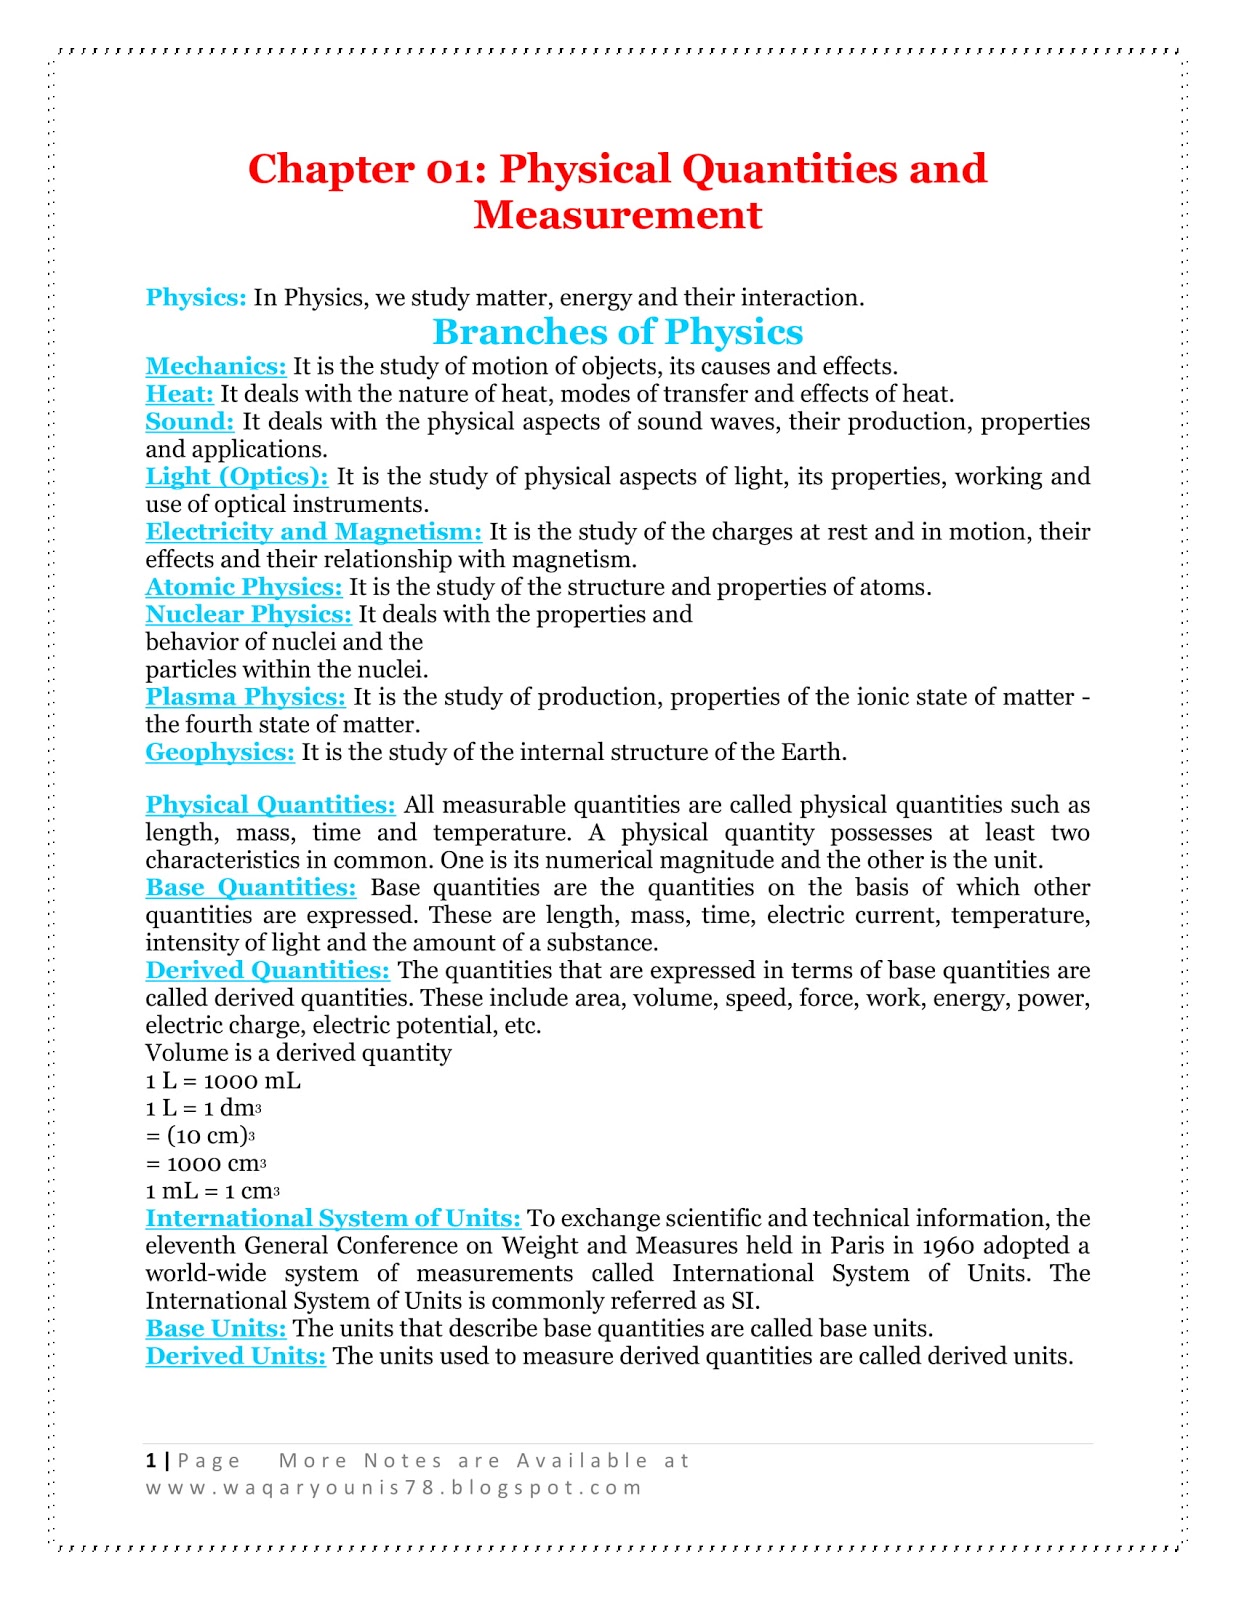 physics assignment for class 9 pdf